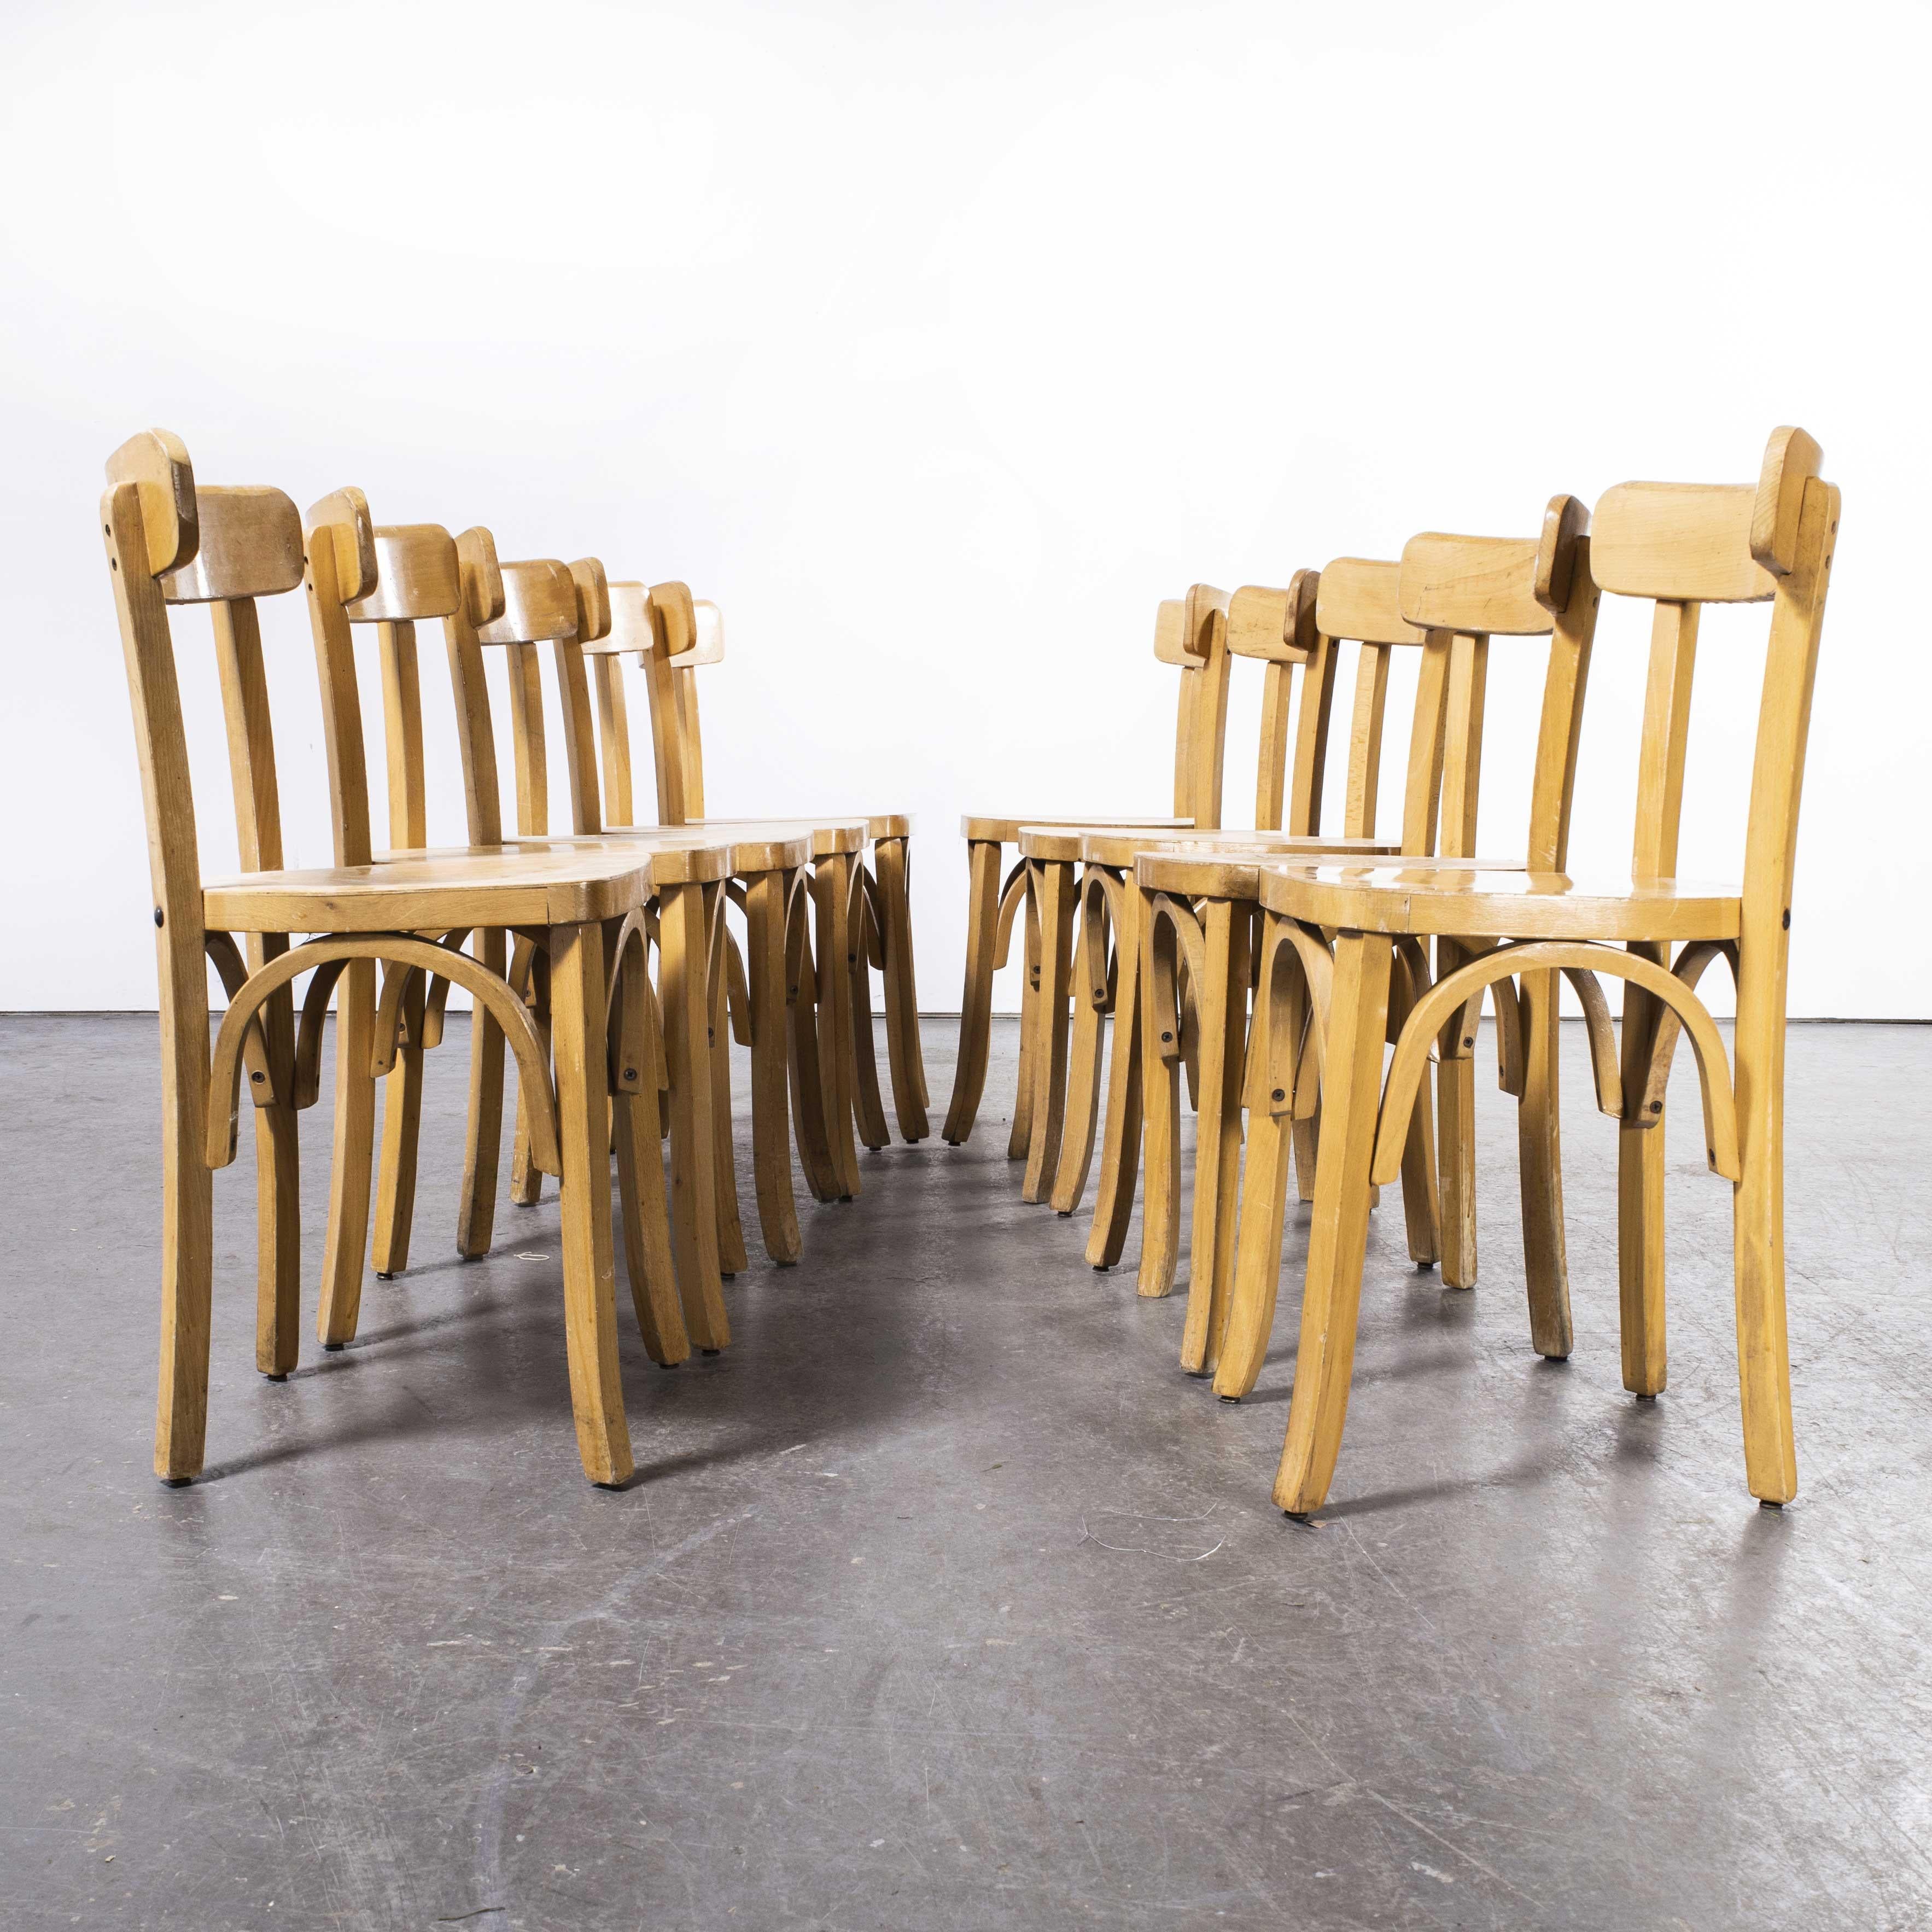 1950’s French Baumann blonde beech bentwood dining chairs – set of ten (Model 1405)

1950’s French Baumann blonde beech bentwood dining chairs – set of ten (Model 1405). Baumann is a slightly off the radar French producer just starting to gain